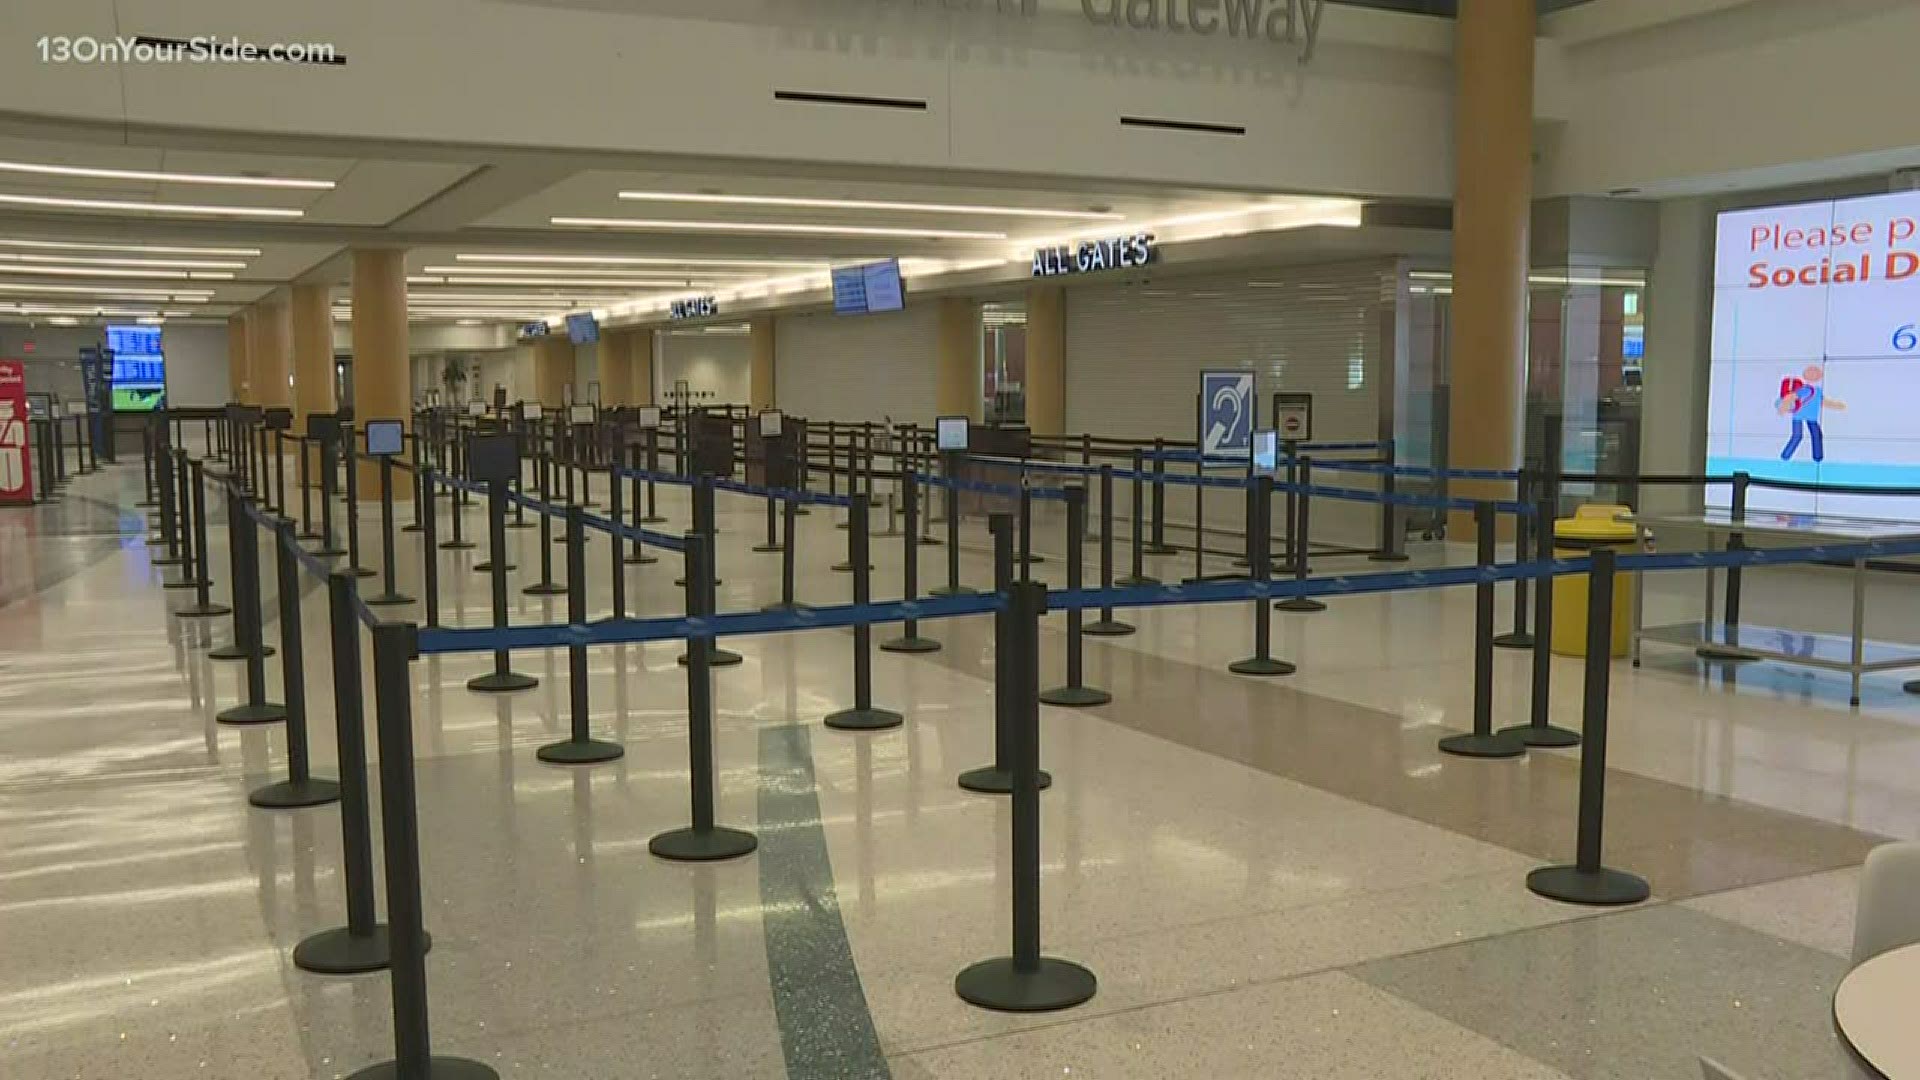 “We have not seen passenger levels like this since the 1950s,’’ said Torrance A. Richardson, president and CEO of the Gerald R. Ford International Airport Authority.